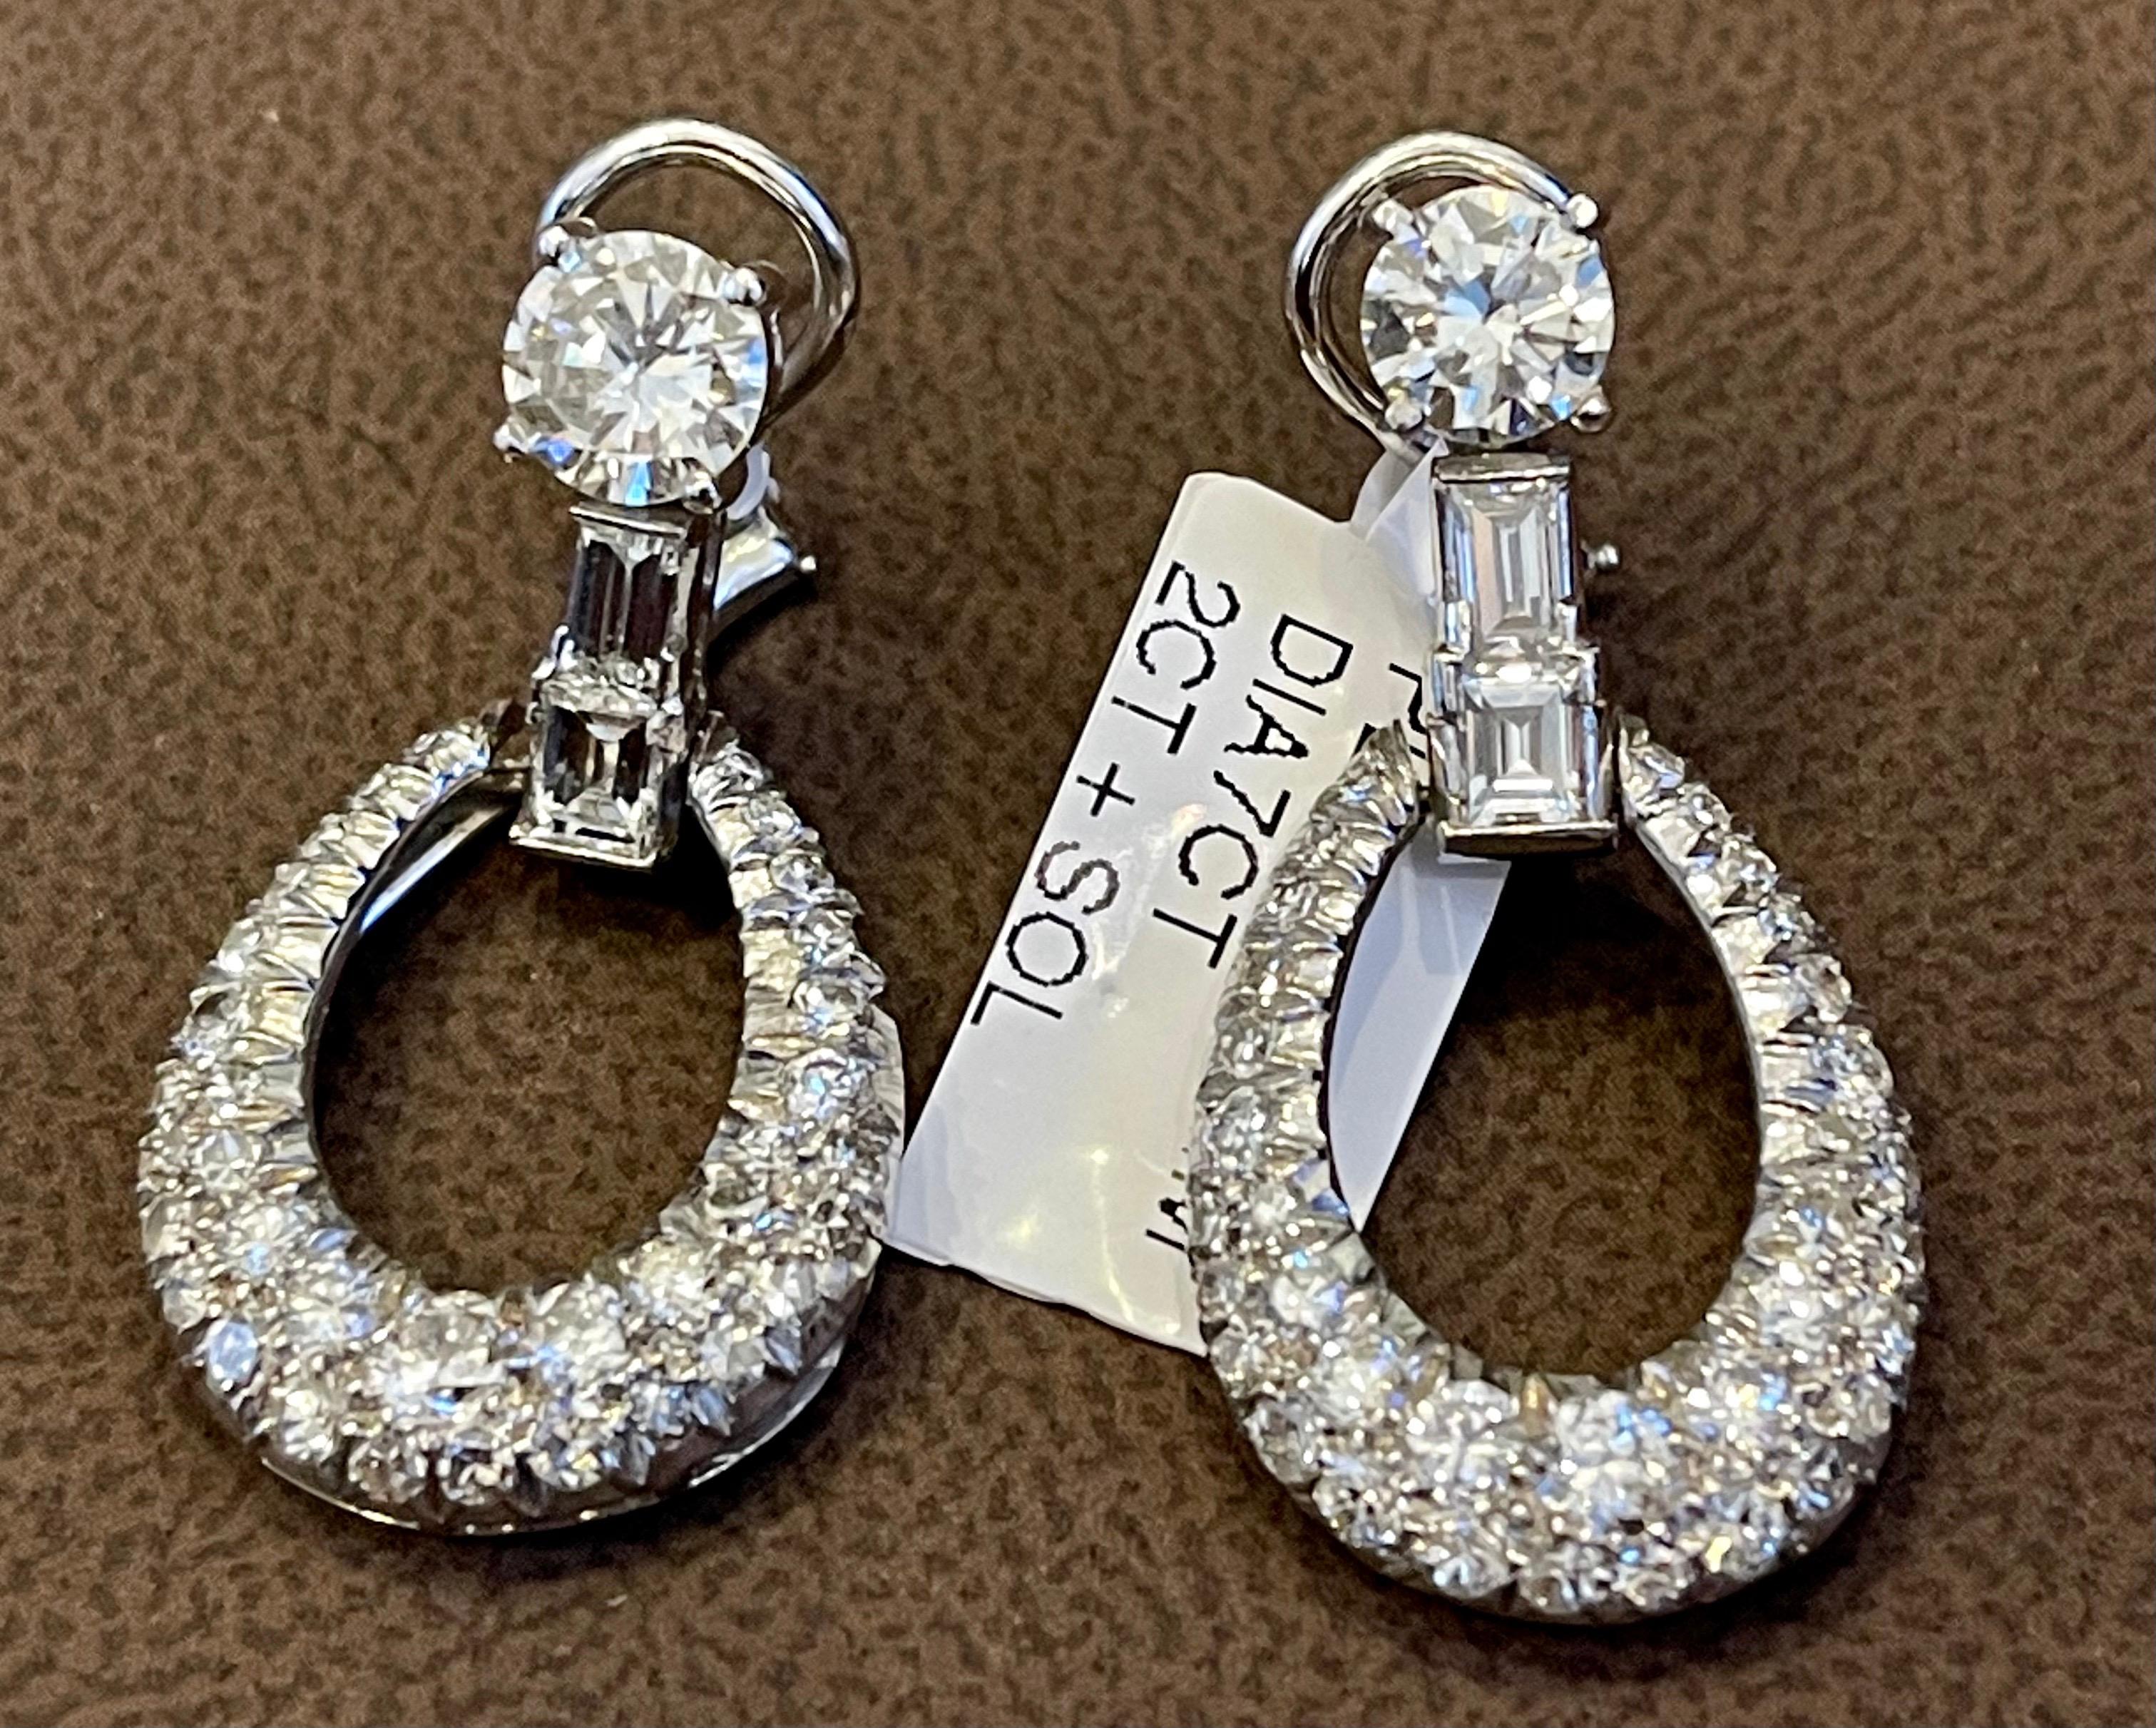 1950s 7 Ct Diamond Drop Cocktail Earrings Platinum with 2 Ct Solitaire Diamond For Sale 4